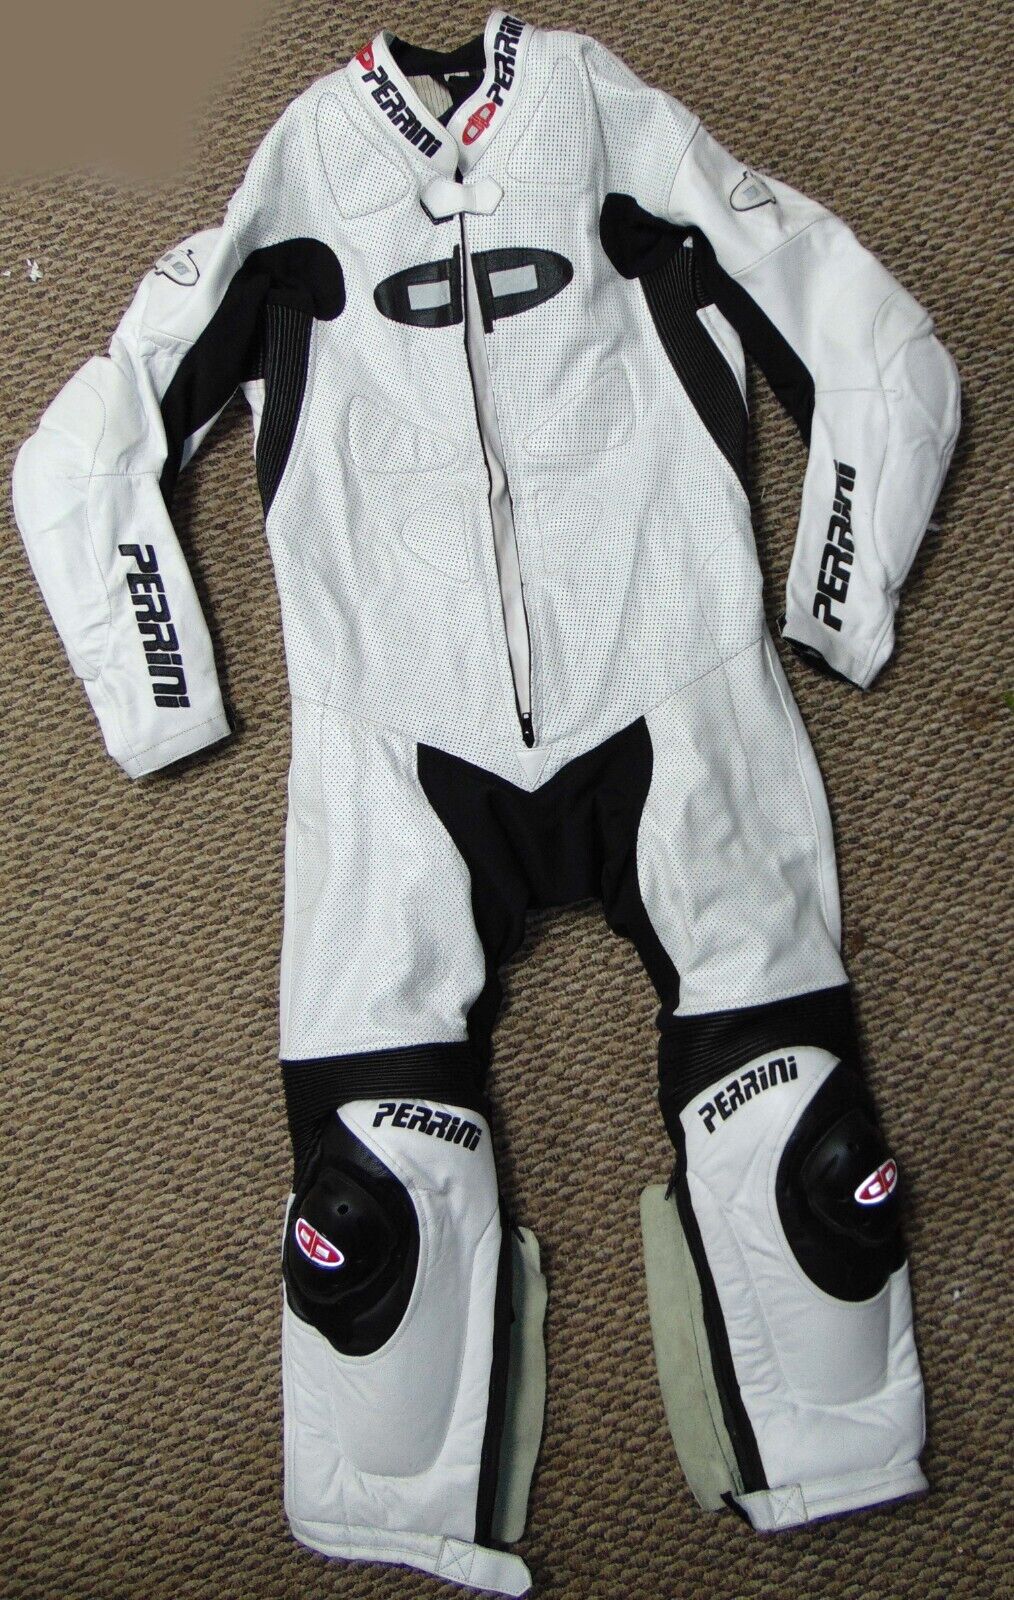 Perrini White Black Leather Racing Motorcycle Riding Suit 48 XL